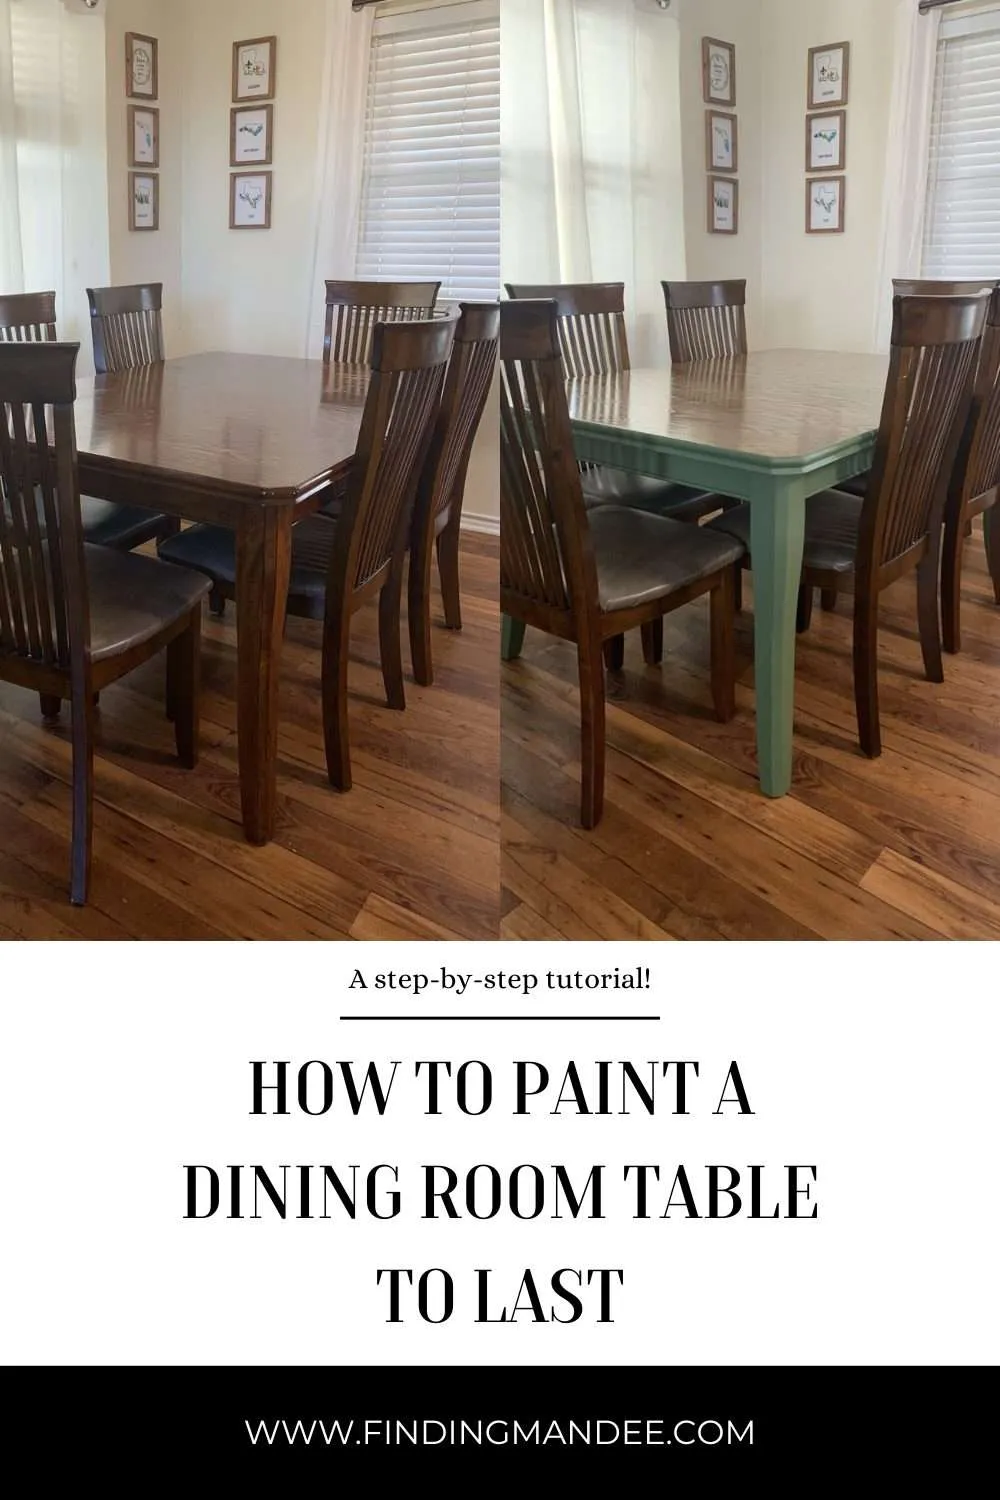 How to Paint a Dining Room Table to Last: A Step-By-Step Tutorial | Finding Mandee